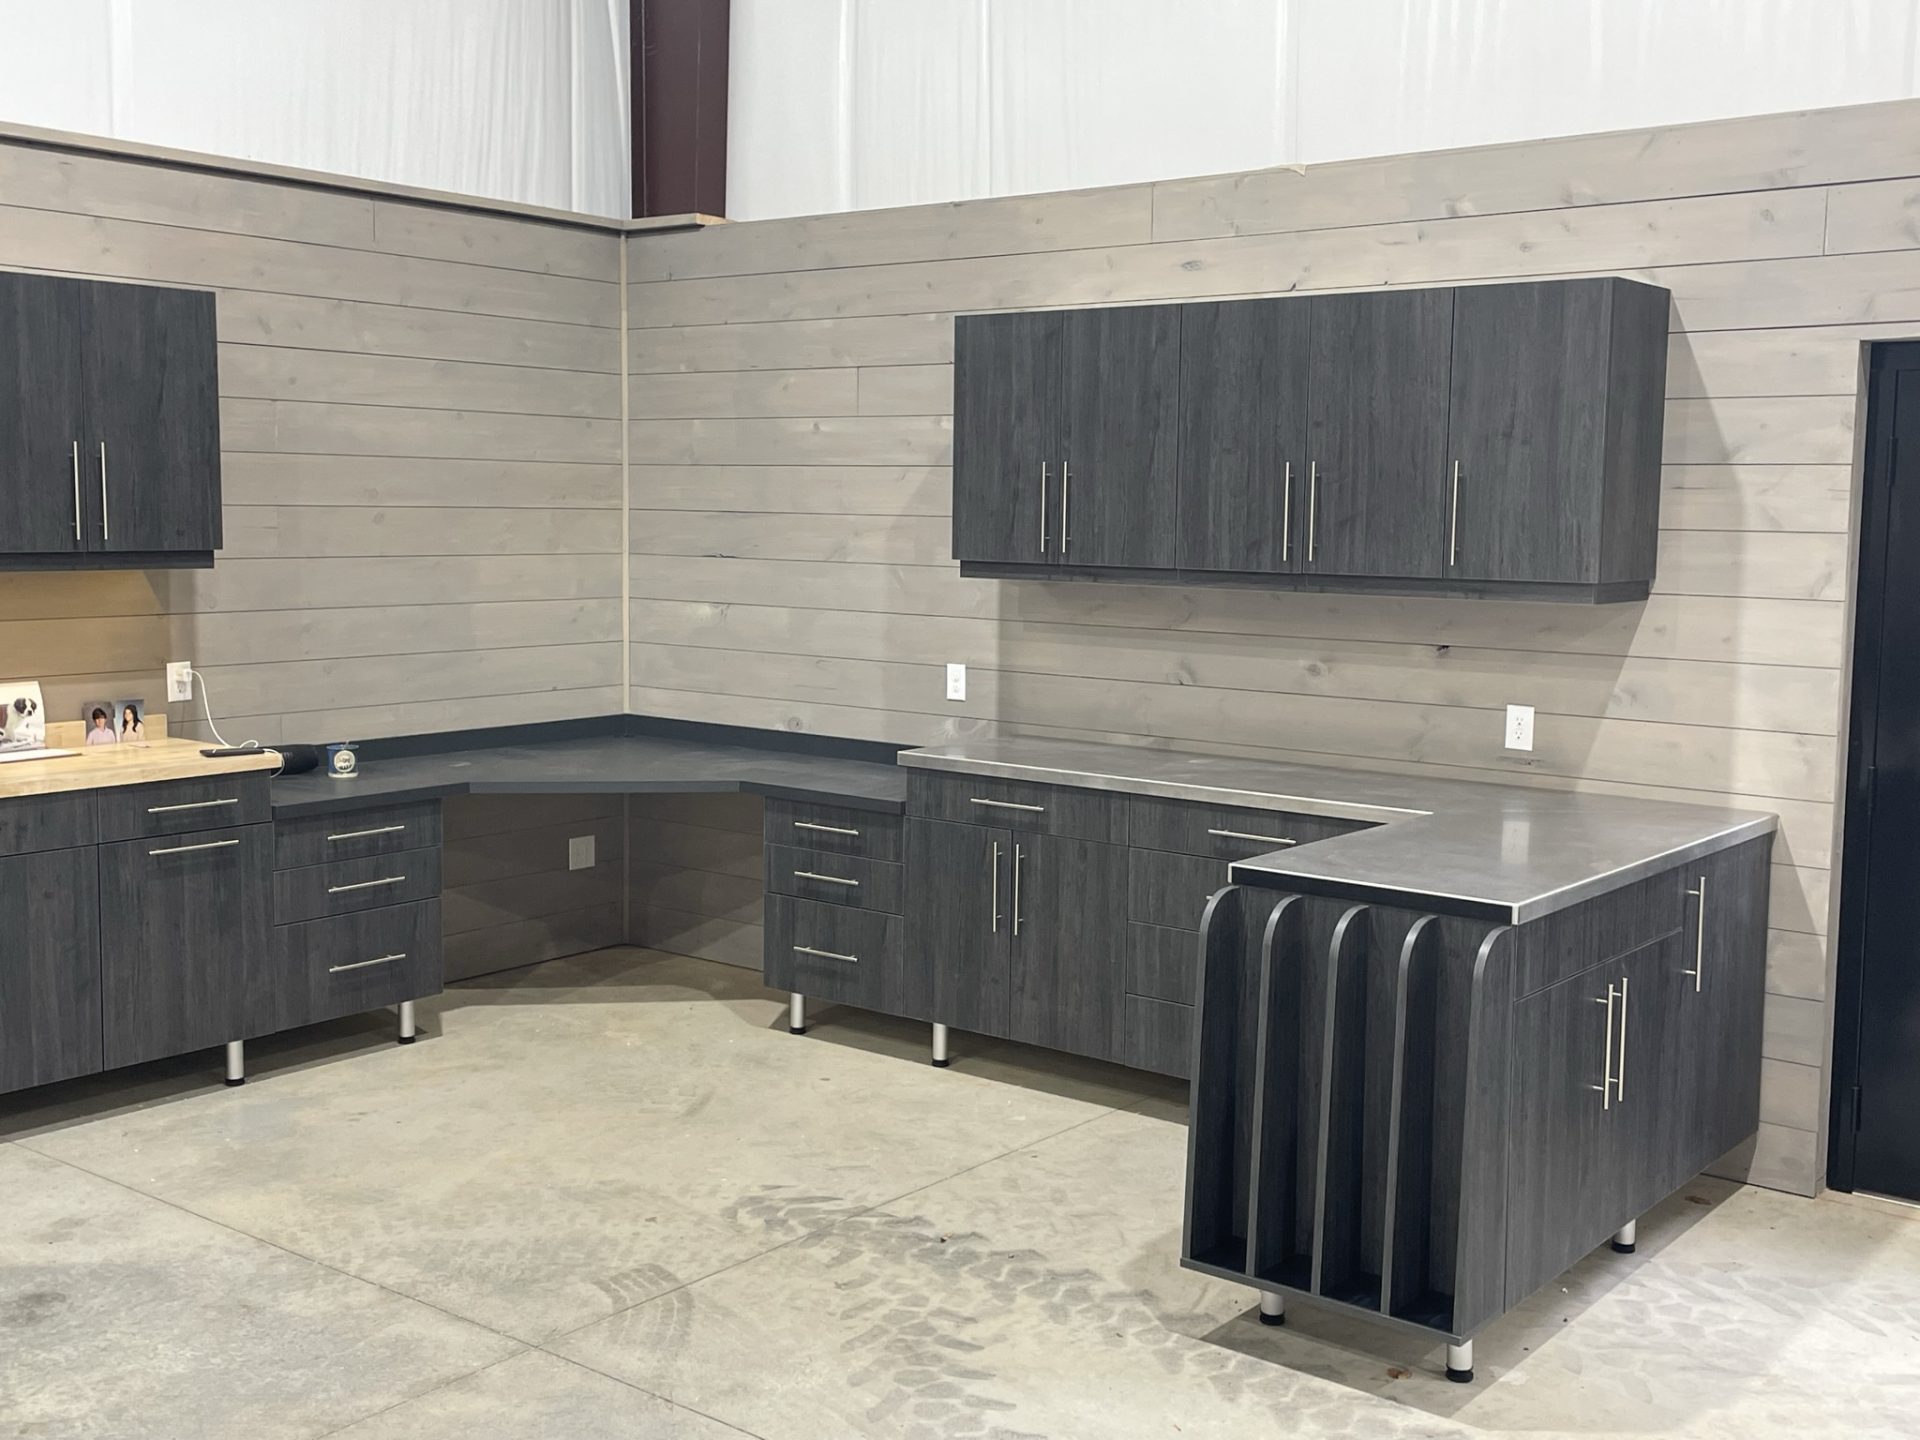 custom garage cabinets upper and lower with custom countertop and gun storage at end